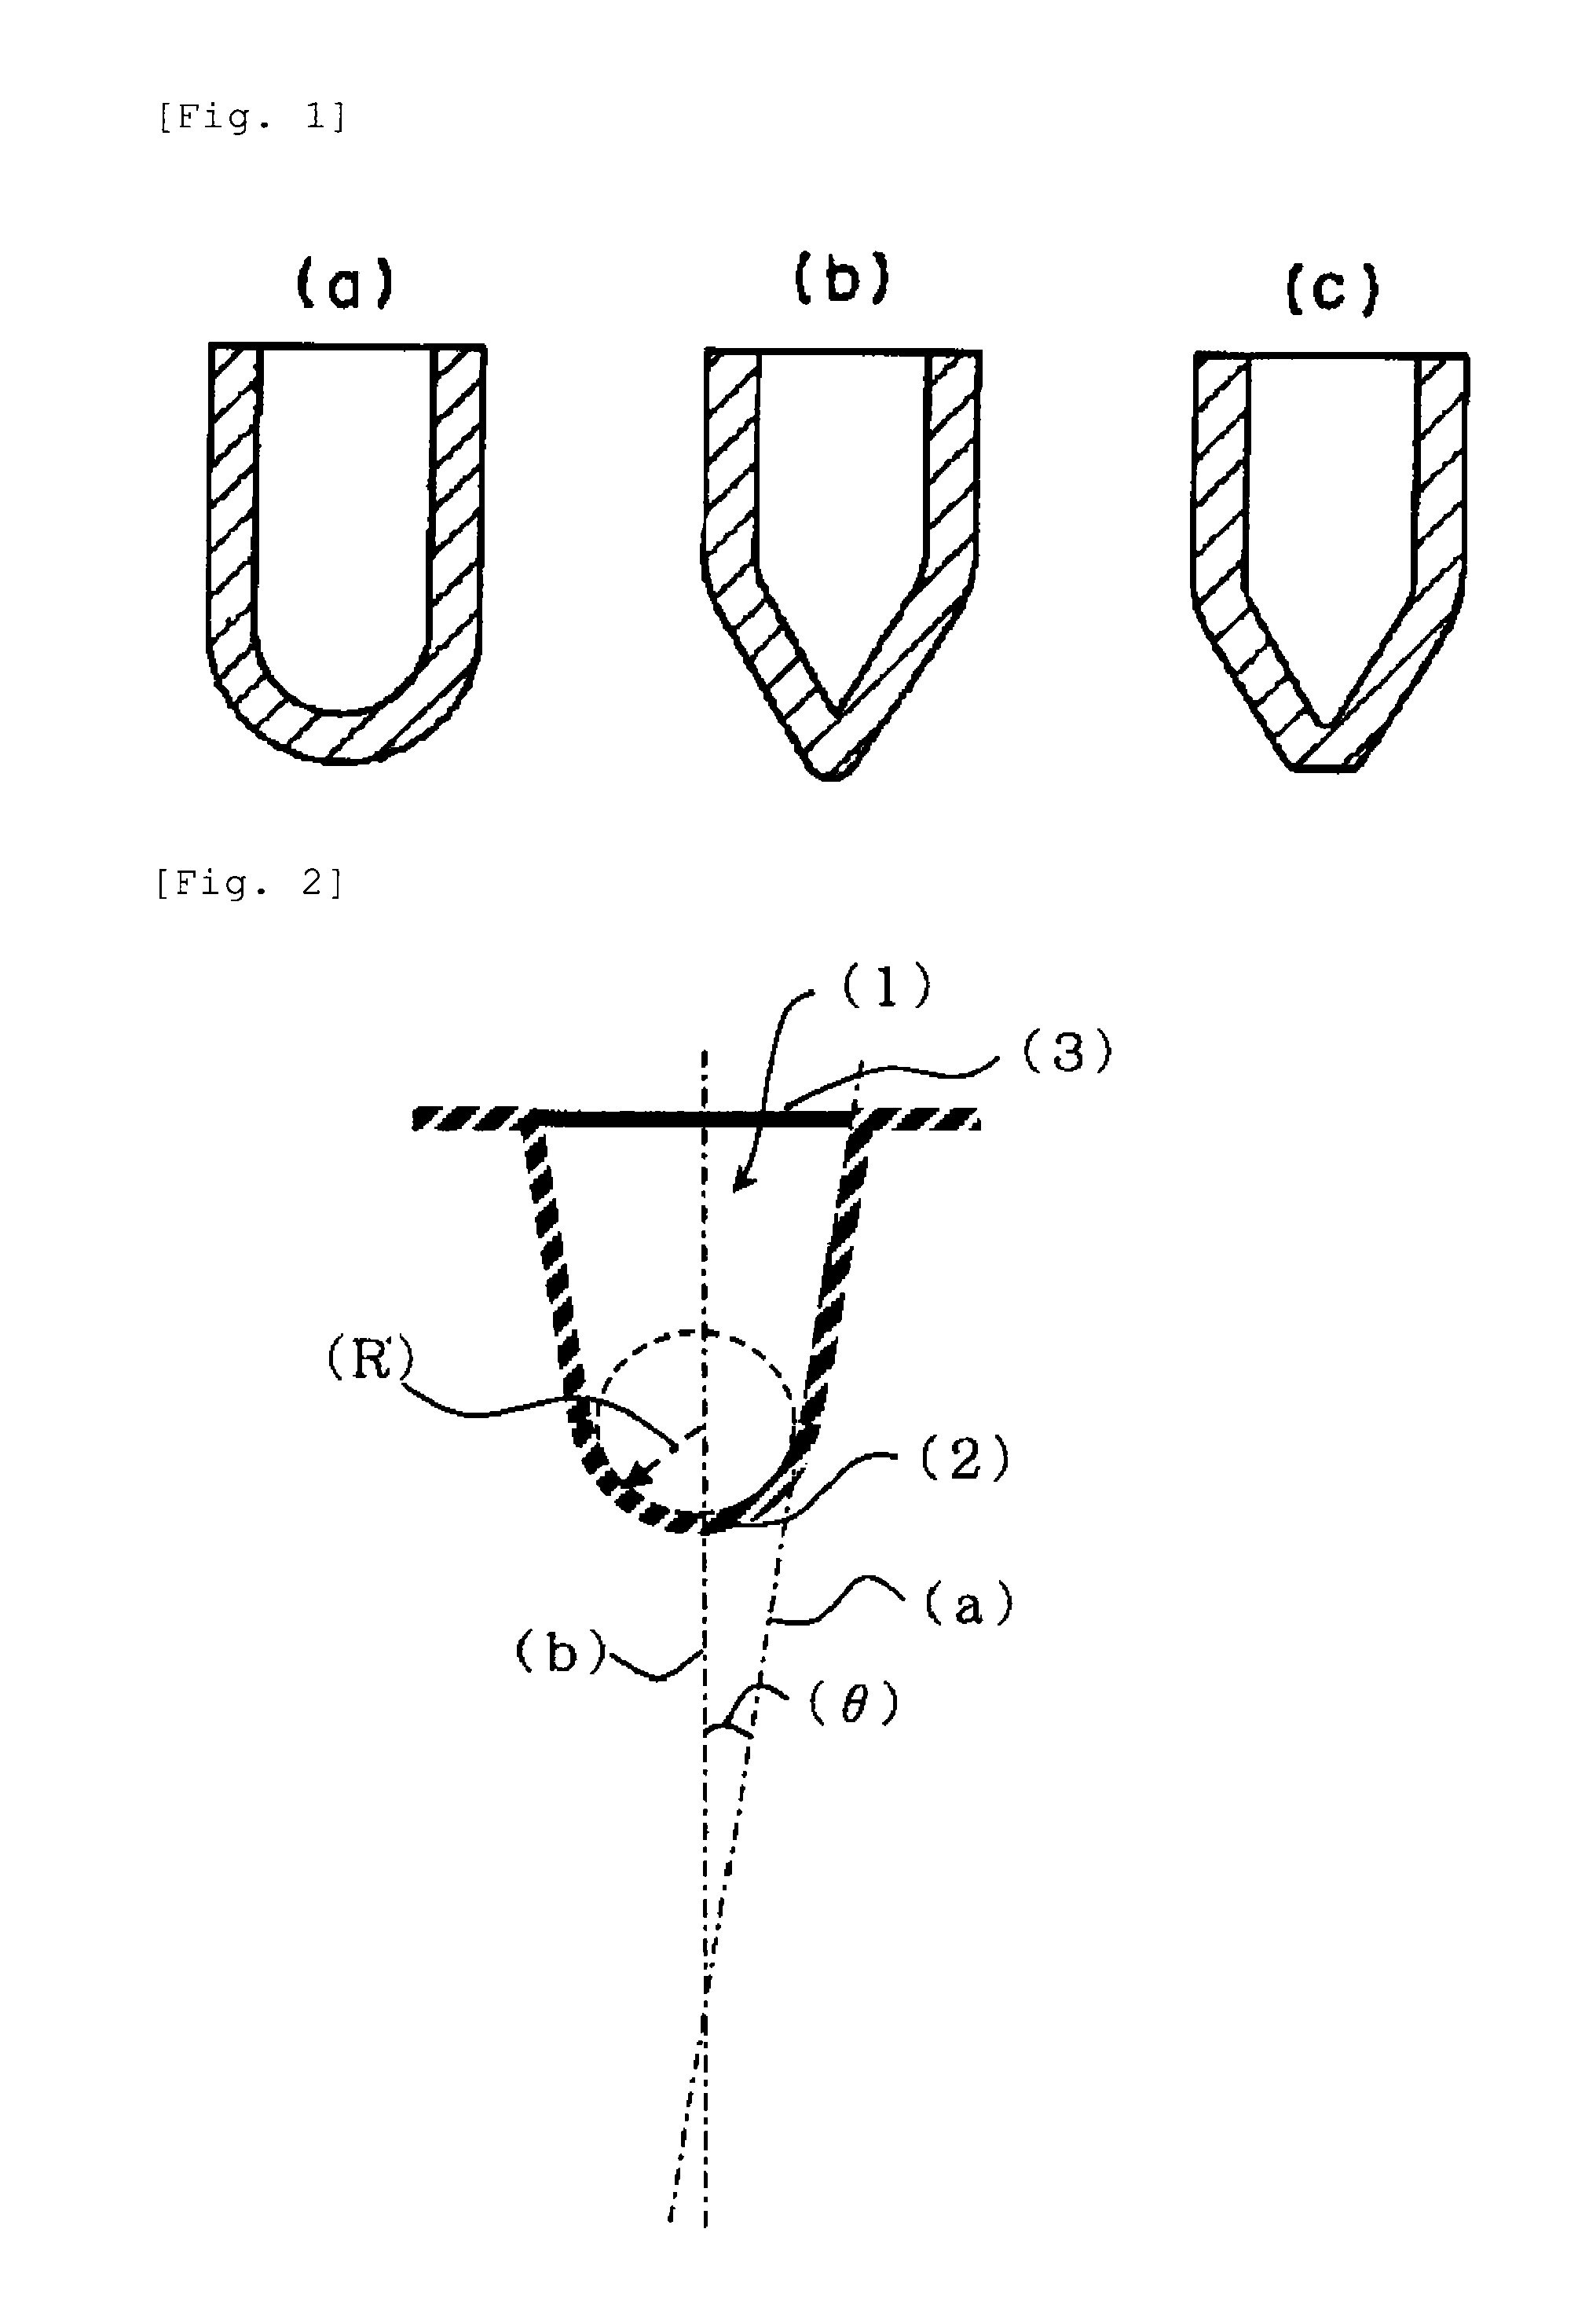 Culture vessel for forming aggregated cell mass